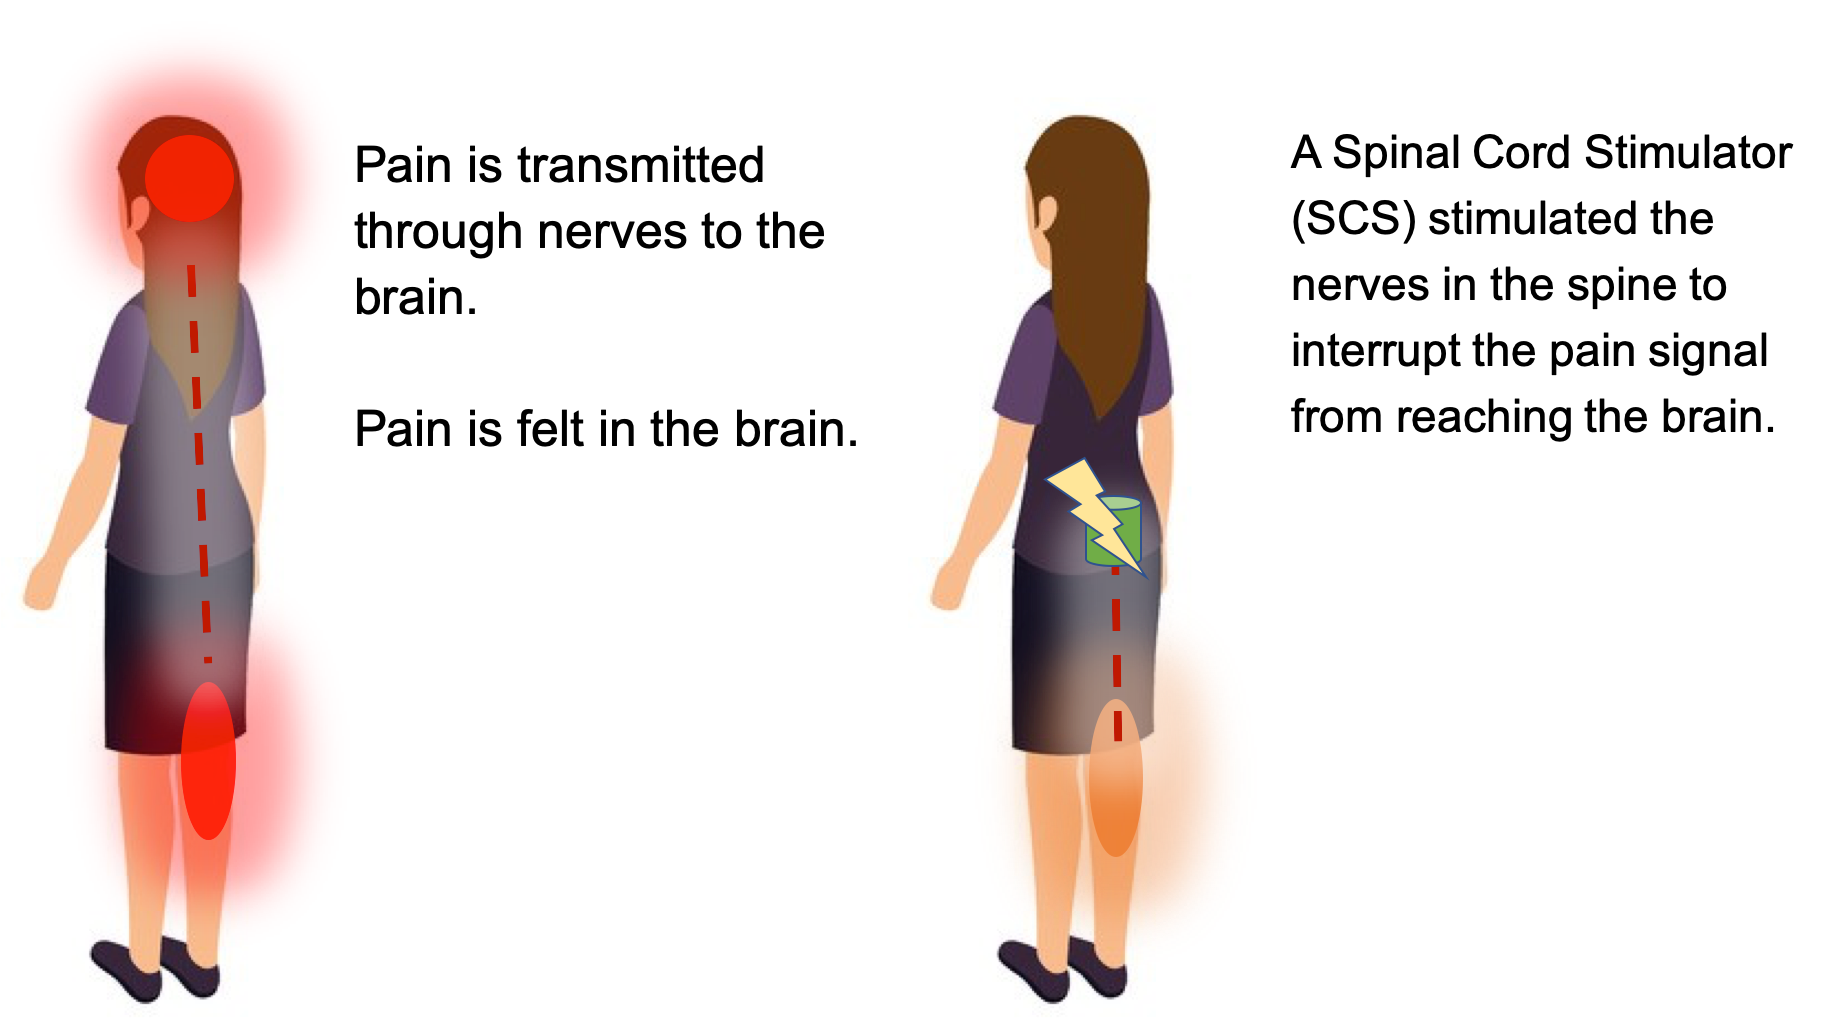 What is Spinal Cord Stimulation (SCS)?